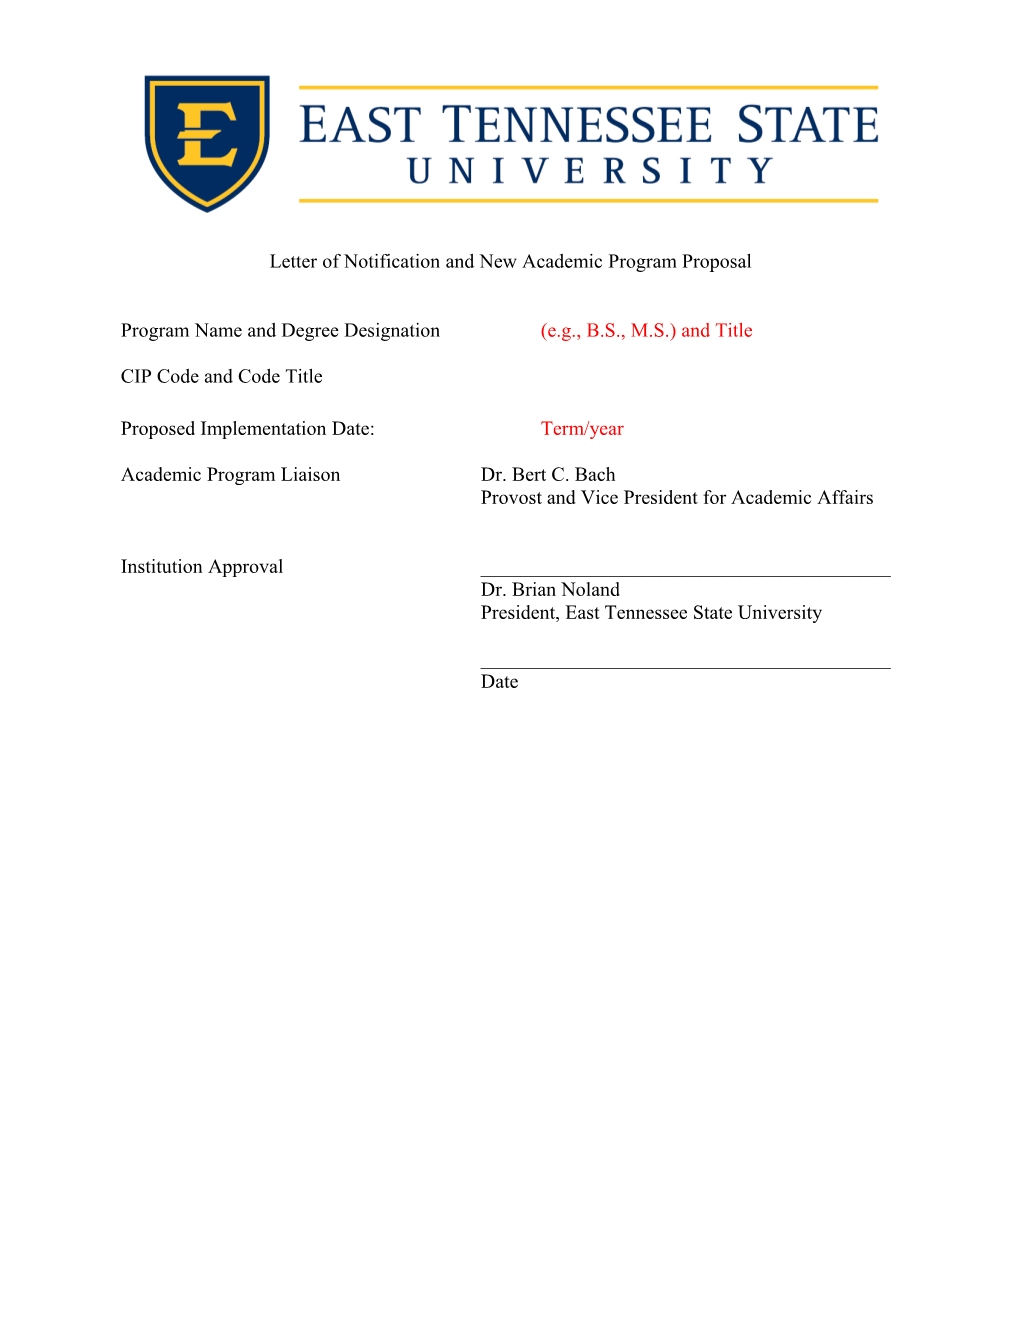 Letter of Notification and New Academic Program Proposal